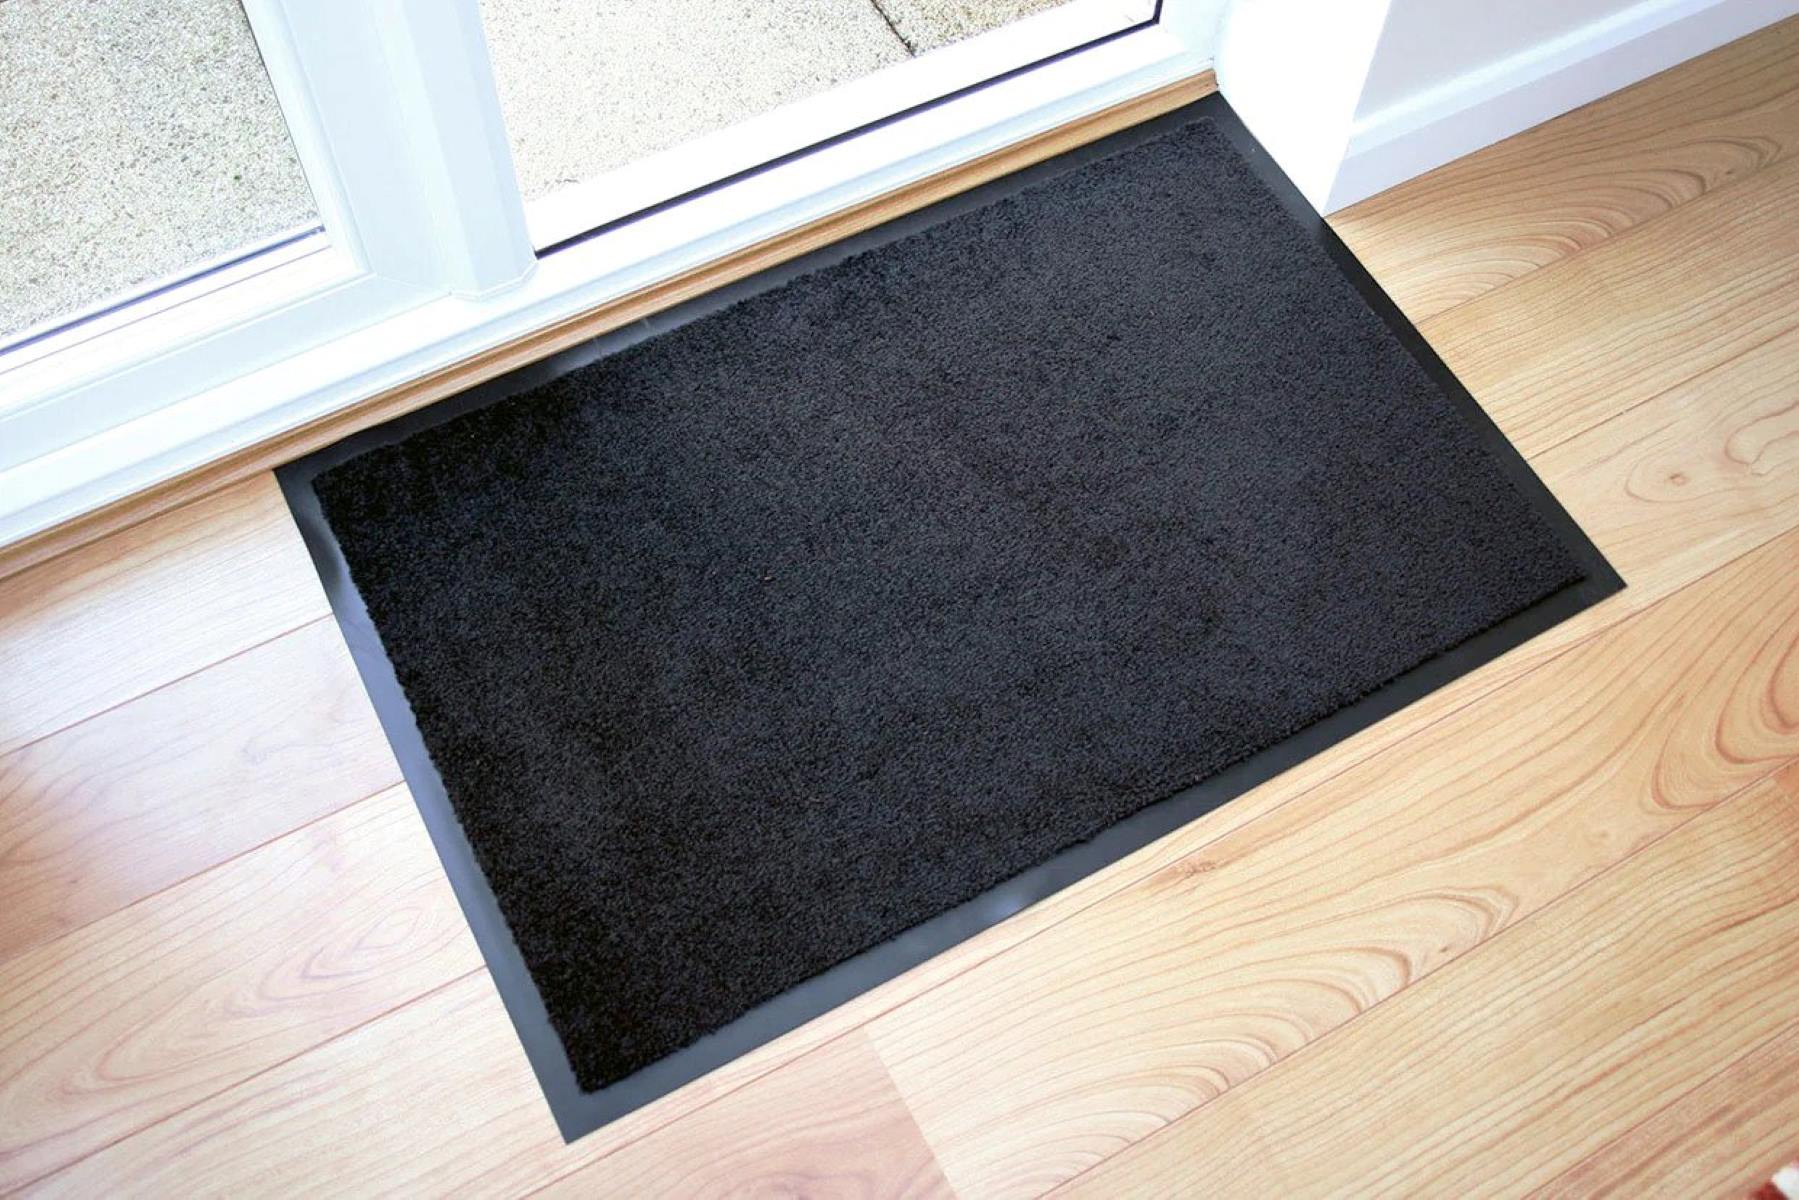 How to Repair Rubber Backing on Scatter Rugs